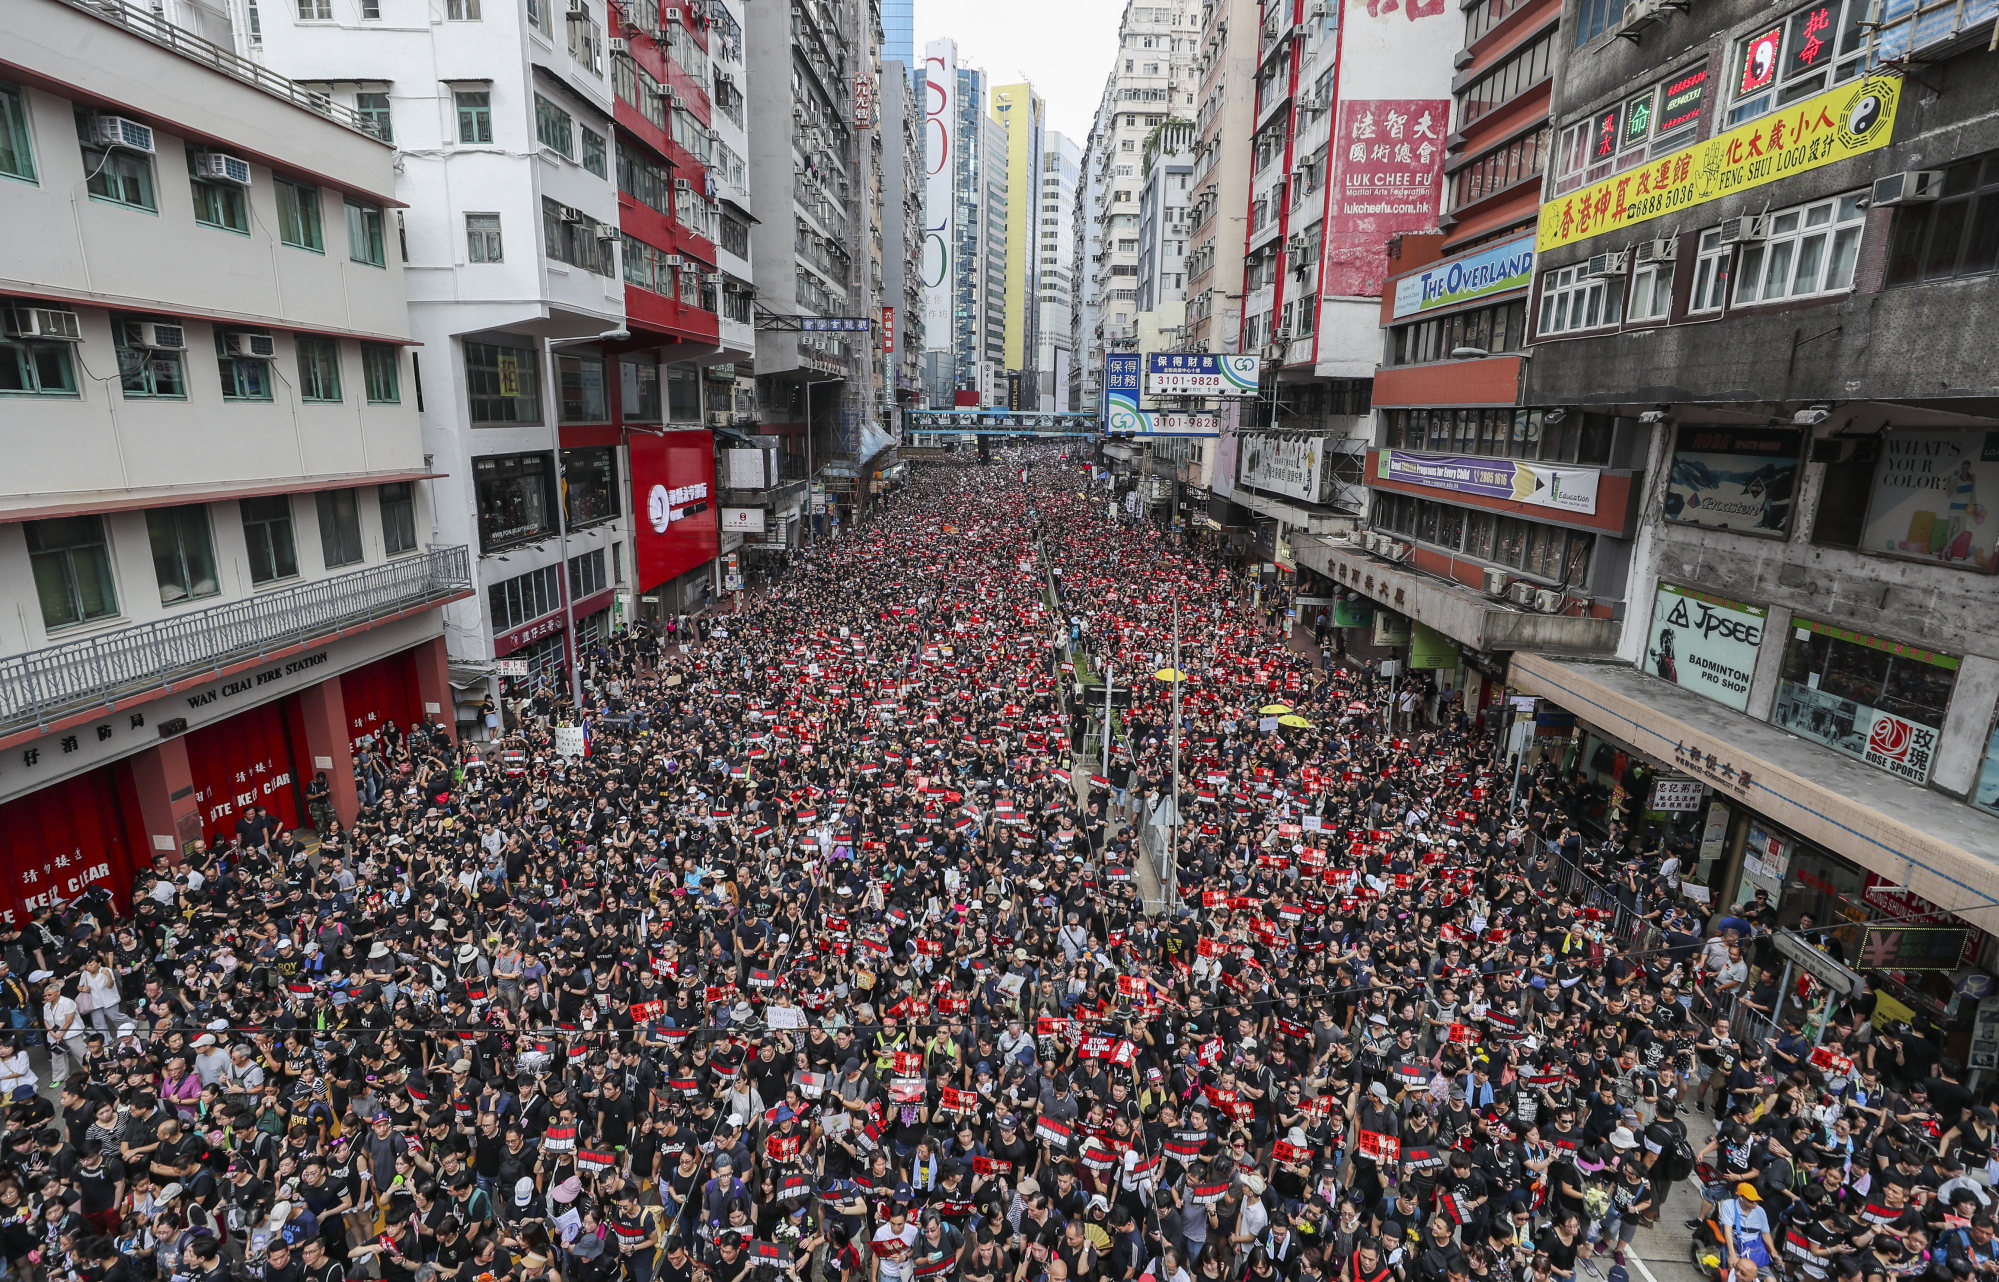 Protesters flood a road in Causeway Bay at the height of the anti-government movement in June of 2019. The campaign would later yield “blue” and “yellow” business circles, alluding to shops and their political leanings. Photo: Sam Tsang